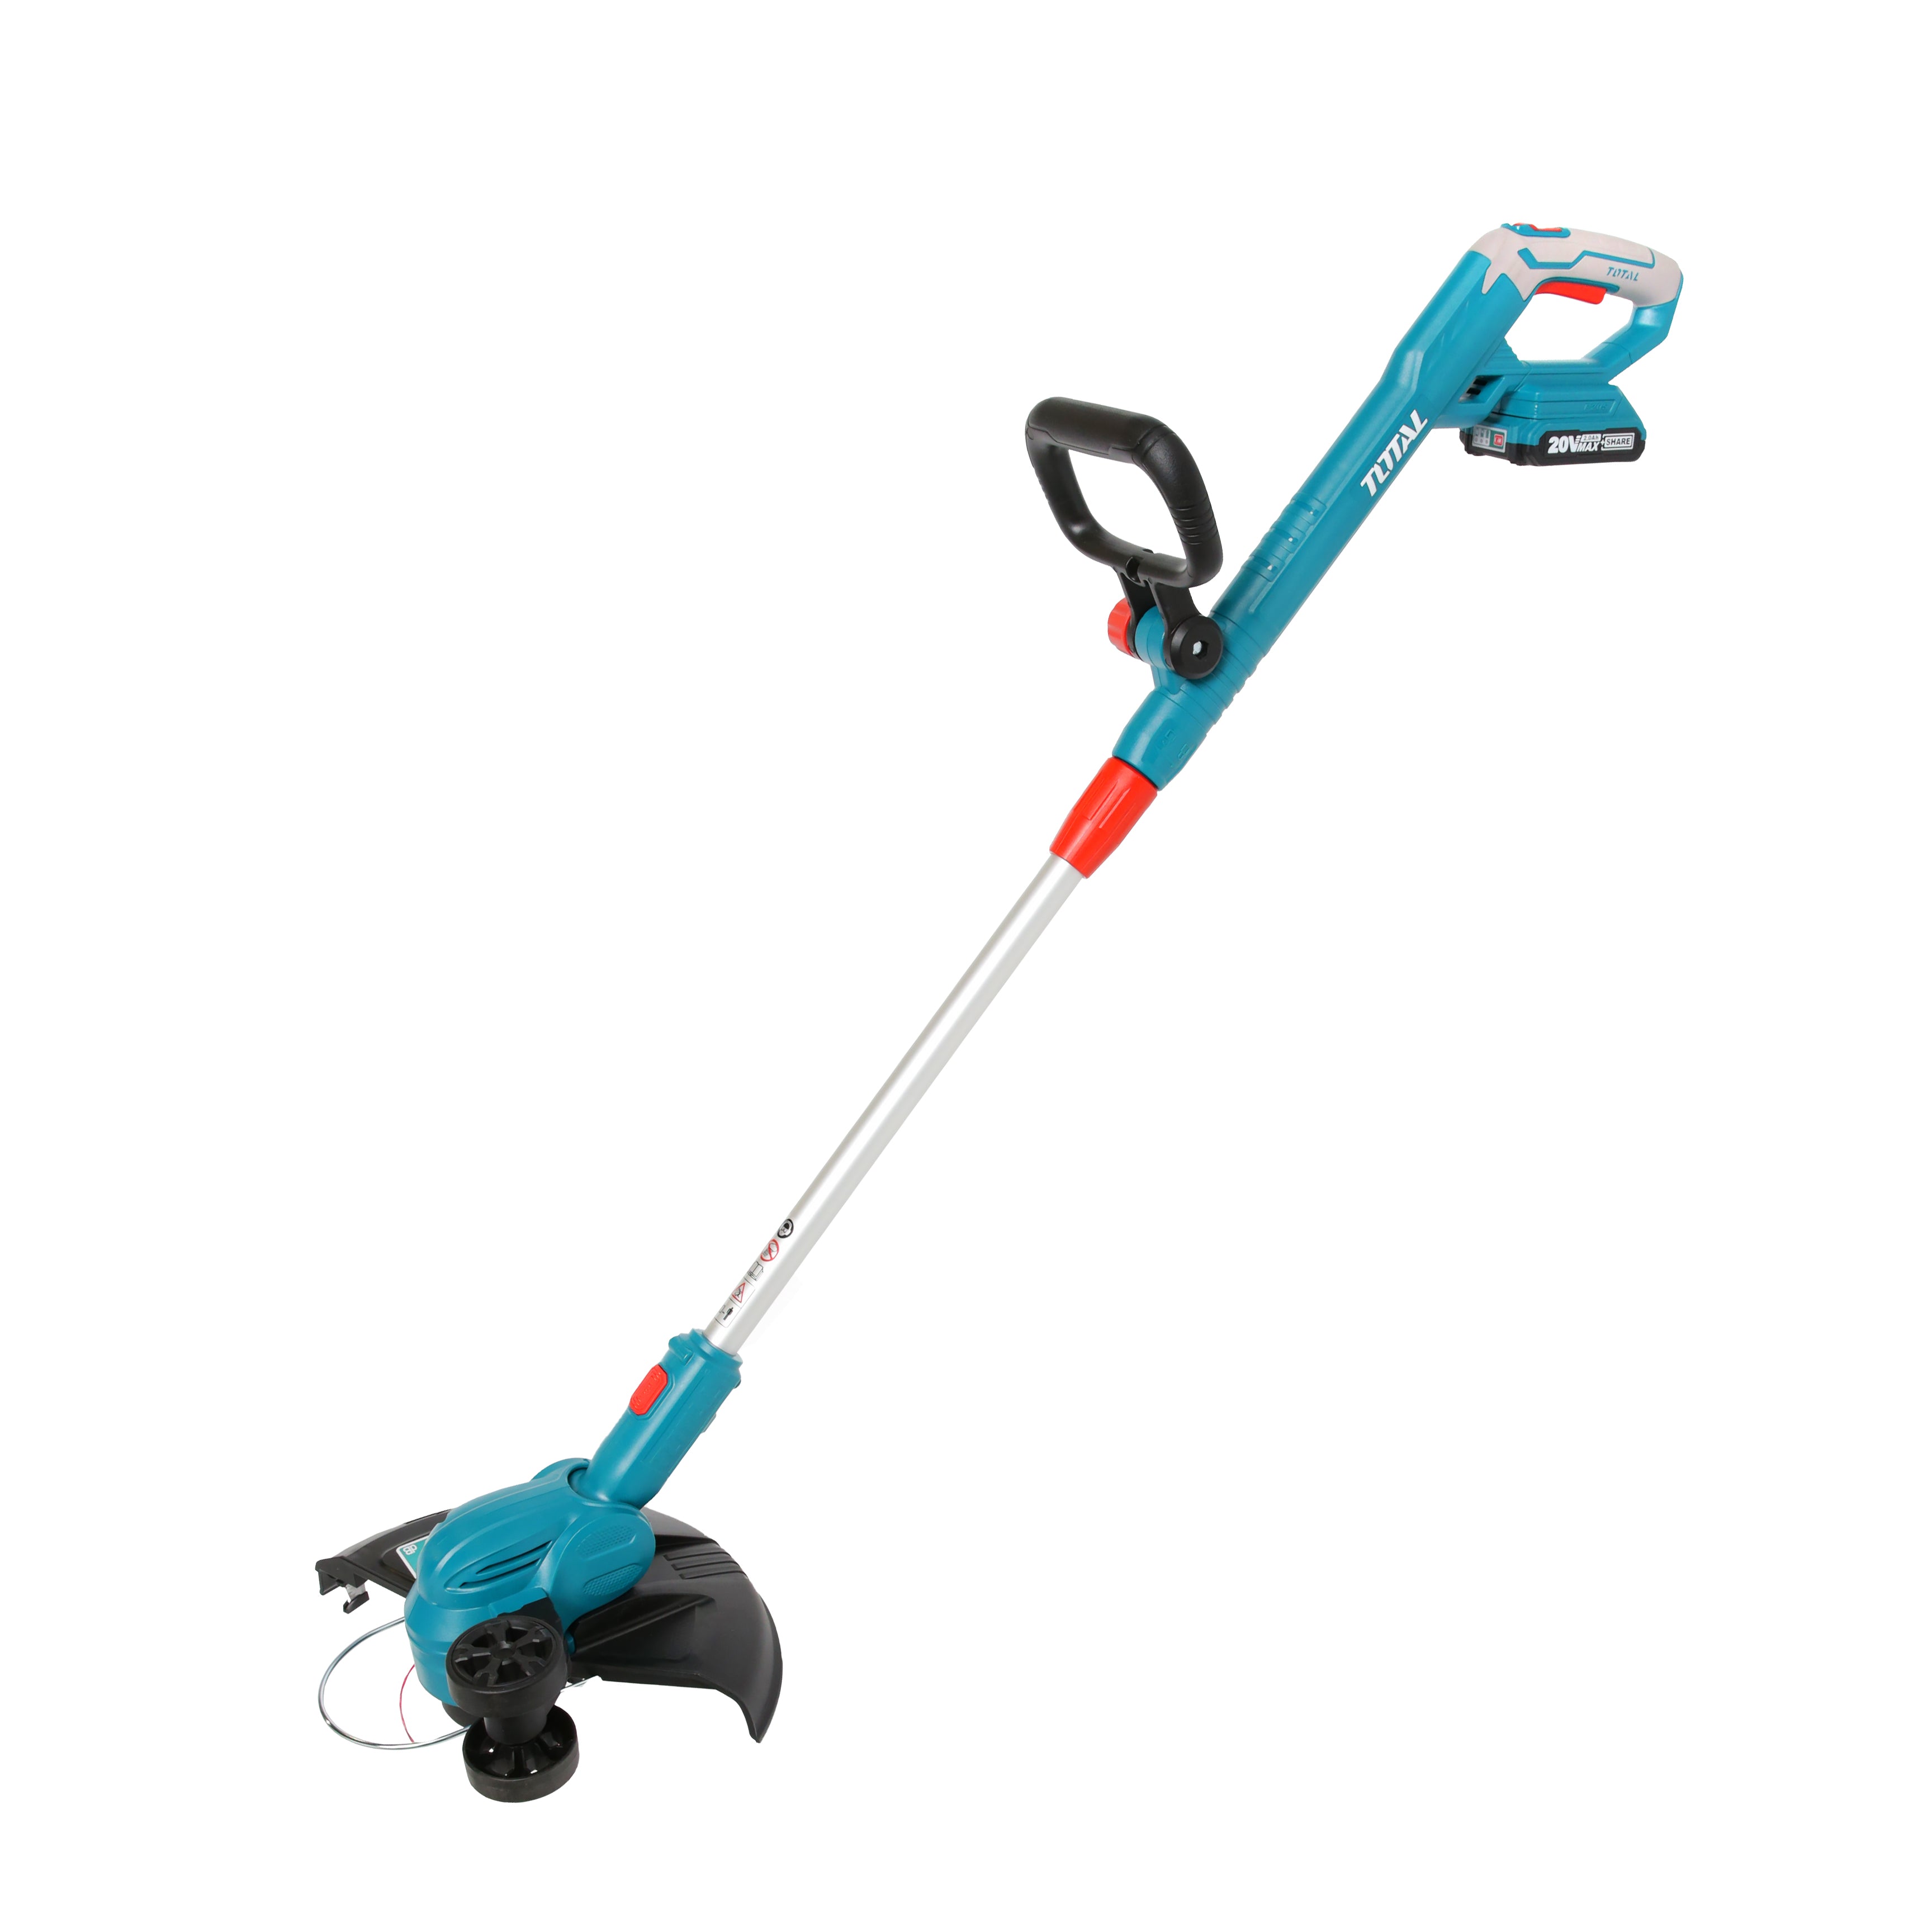 Total Li-Ion 20V Grass Trimmer (with Battery & Charger) - TGTLI203285